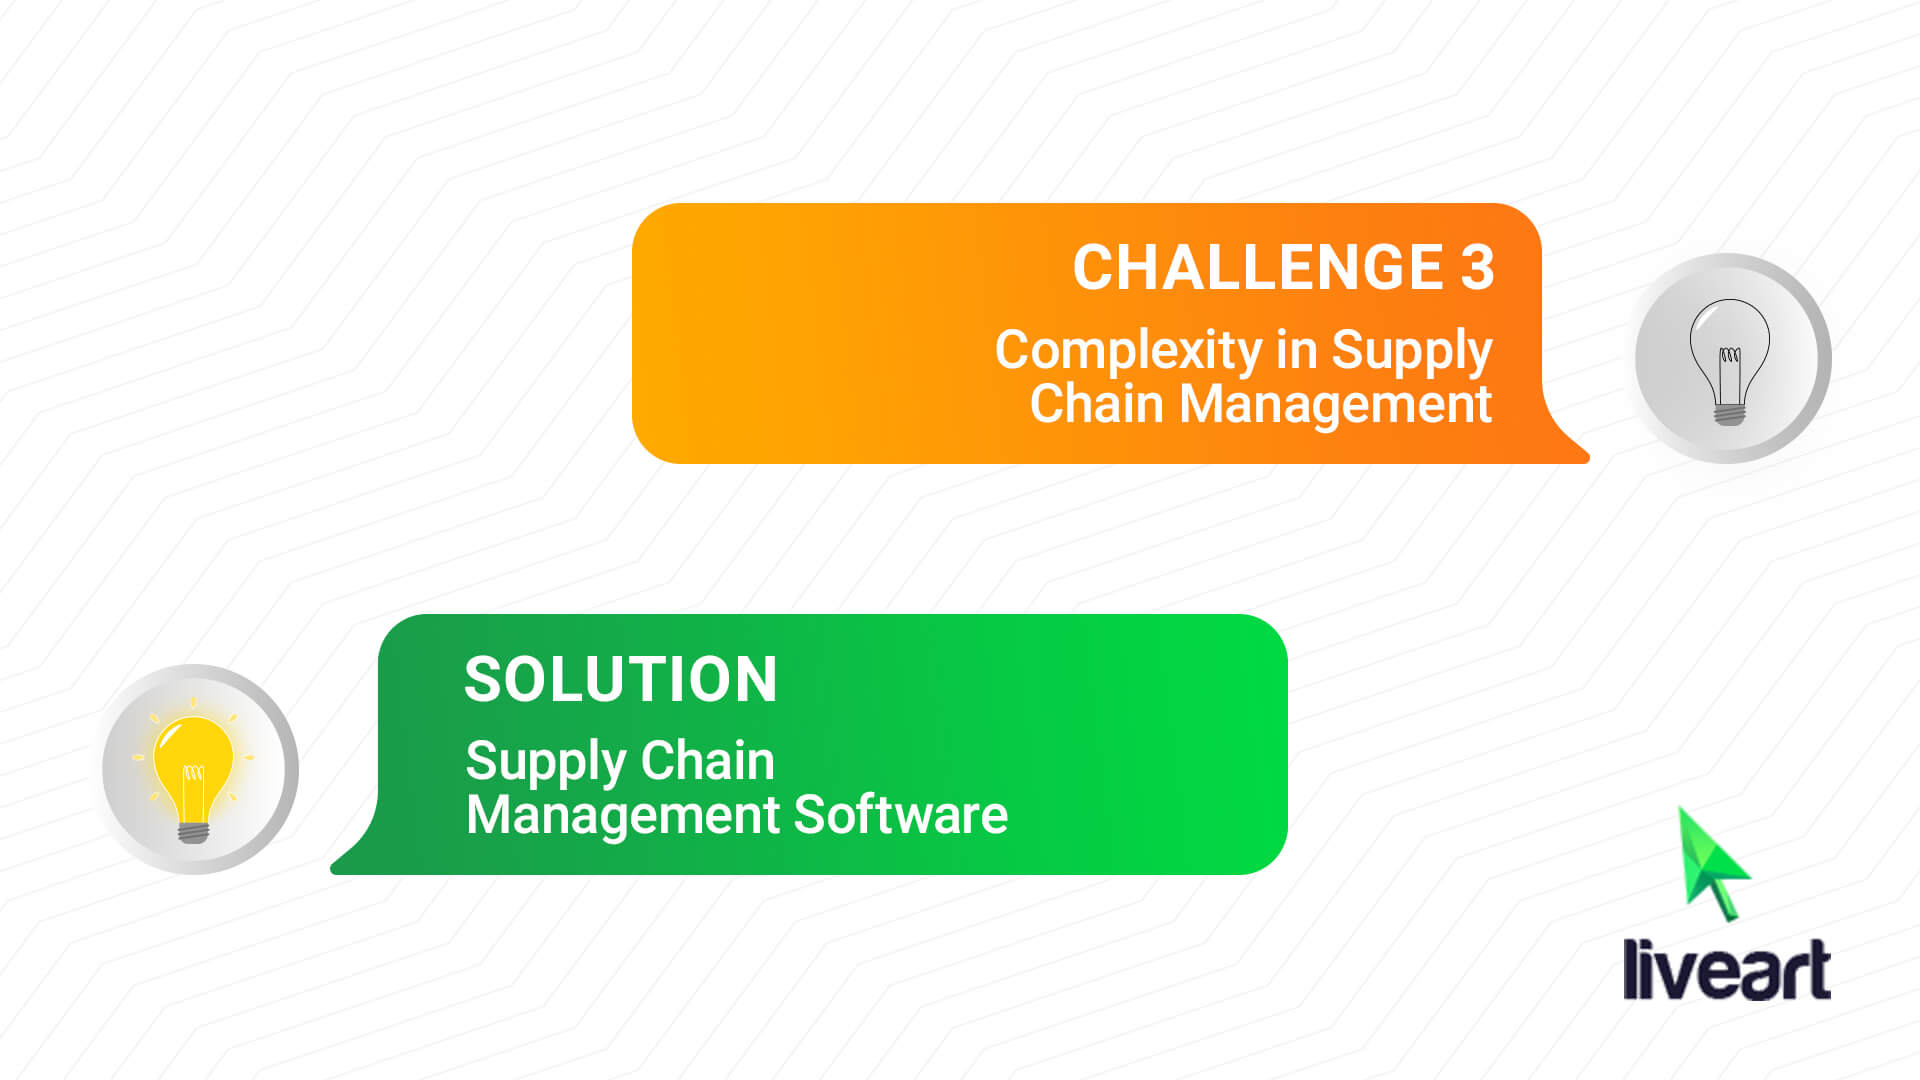 Challenge 3: Complexity in Supply Chain Management